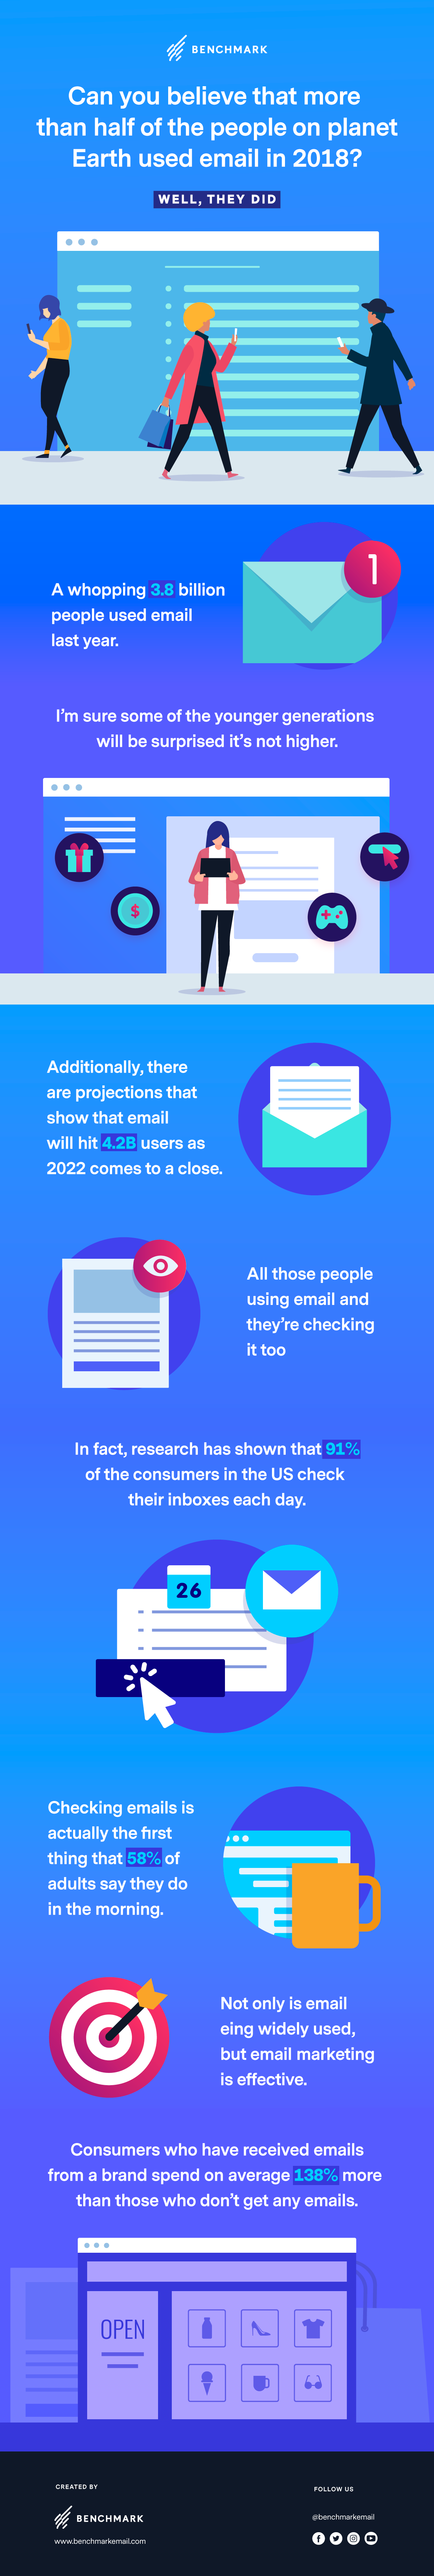 email marketing stats infographic